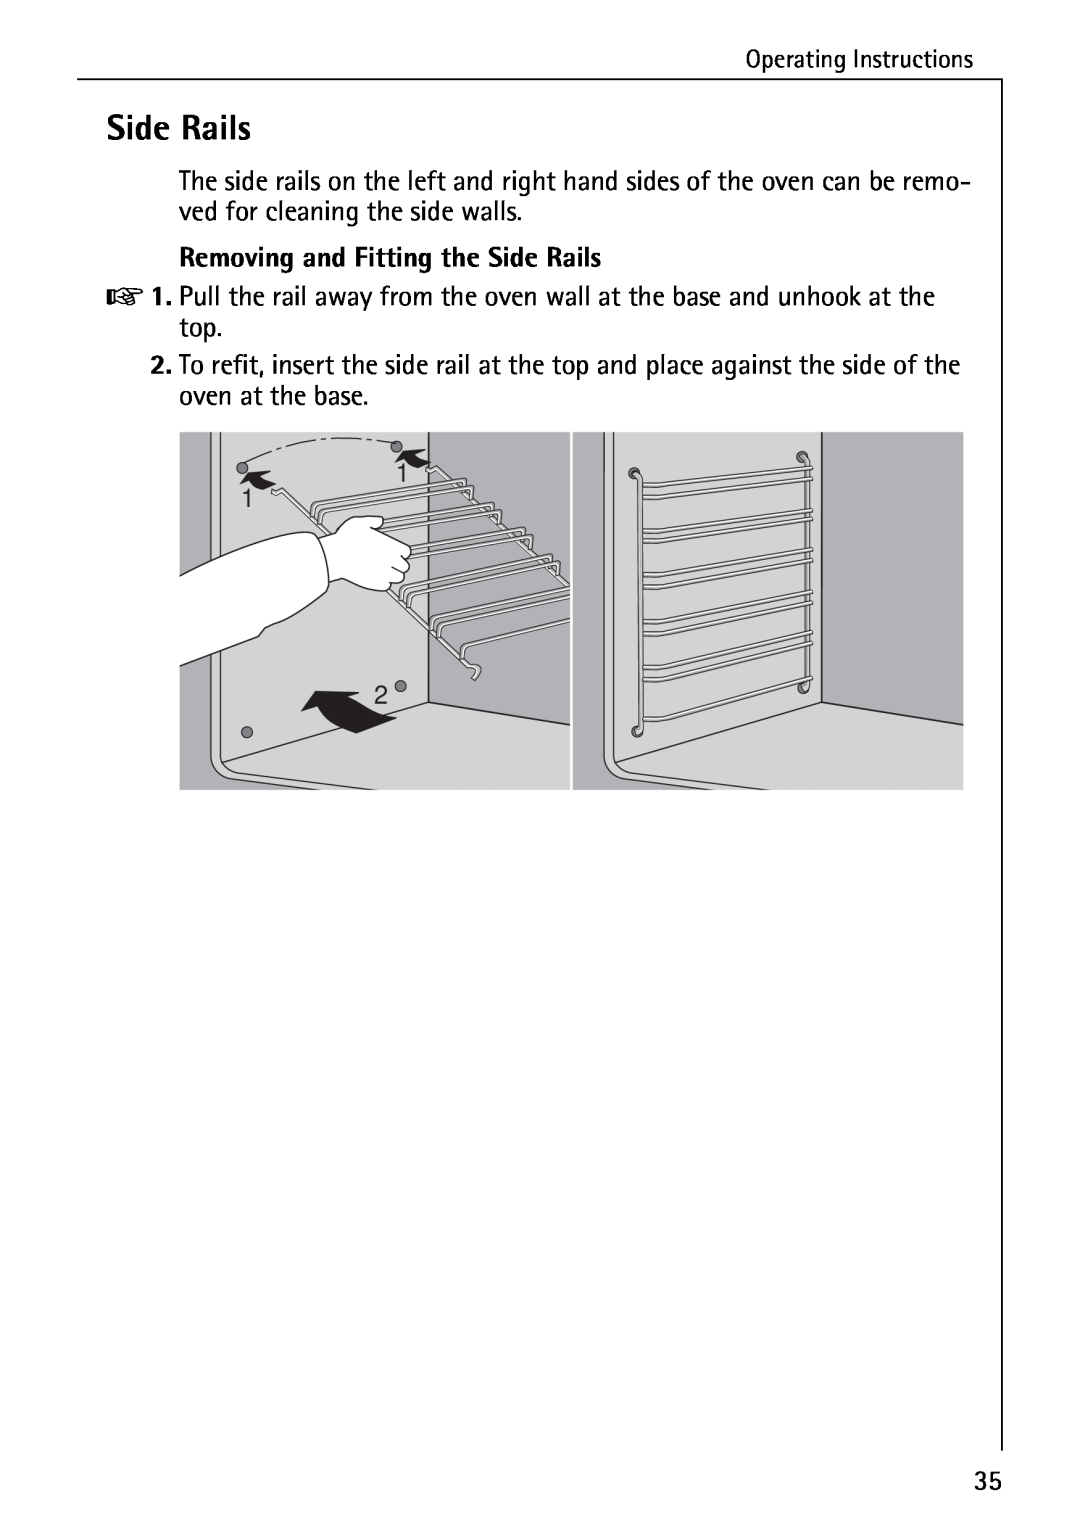 AEG B 2100 operating instructions Removing and Fitting the Side Rails 